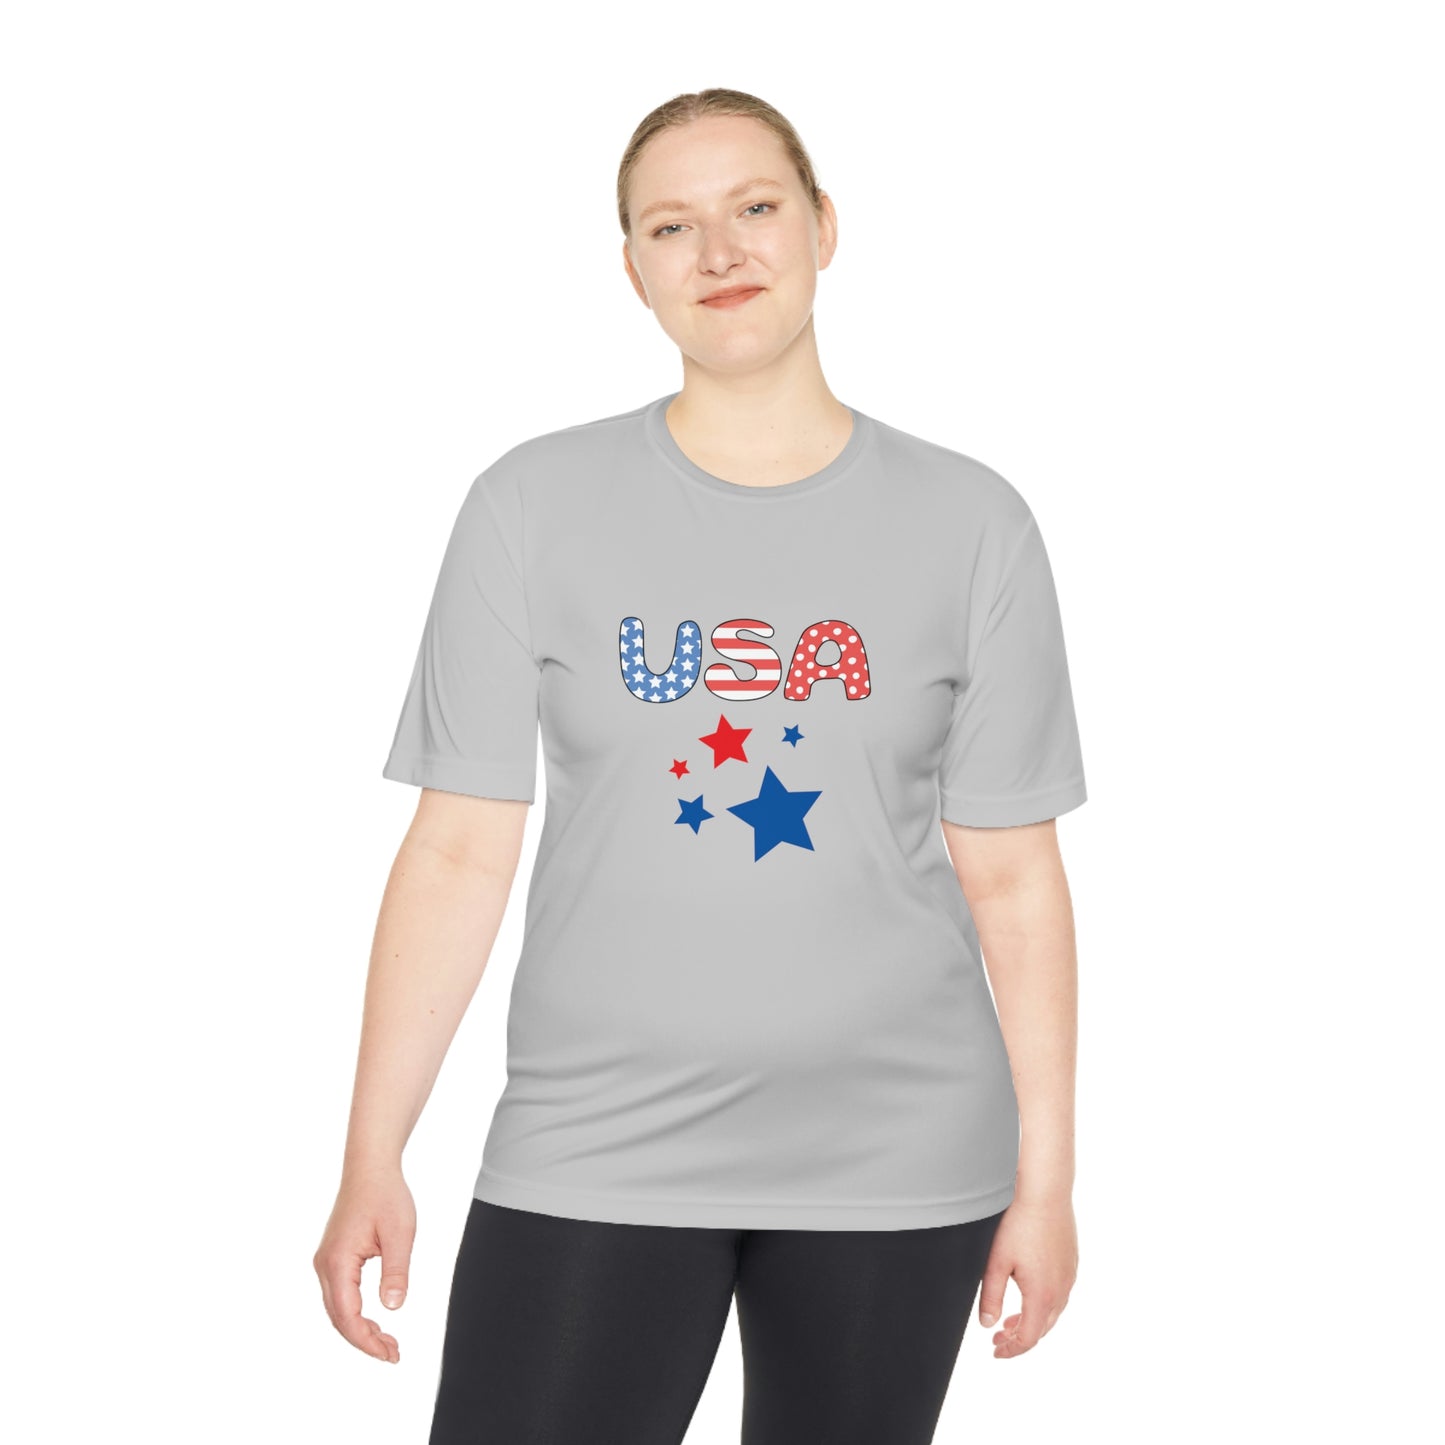 Mock up of a woman wearing the Silver shirt